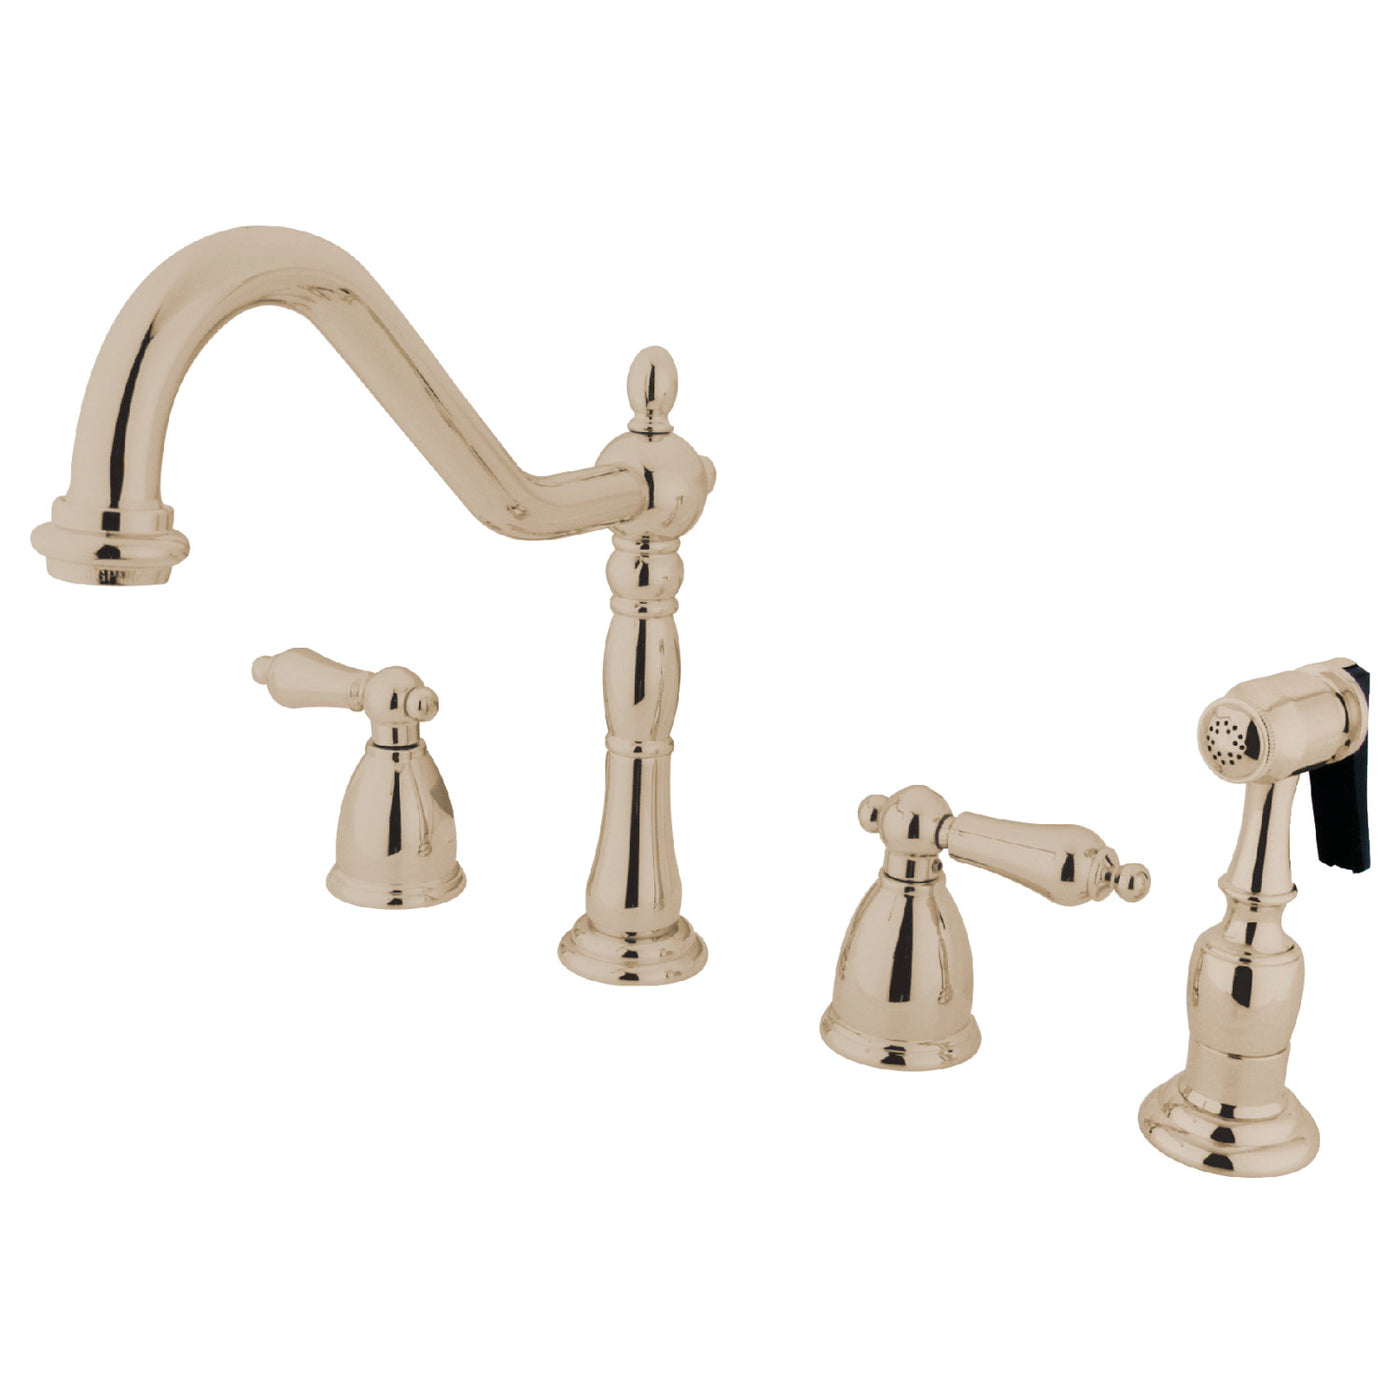 Elements of Design EB1796ALBS Widespread Kitchen Faucet with Brass Sprayer, Polished Nickel